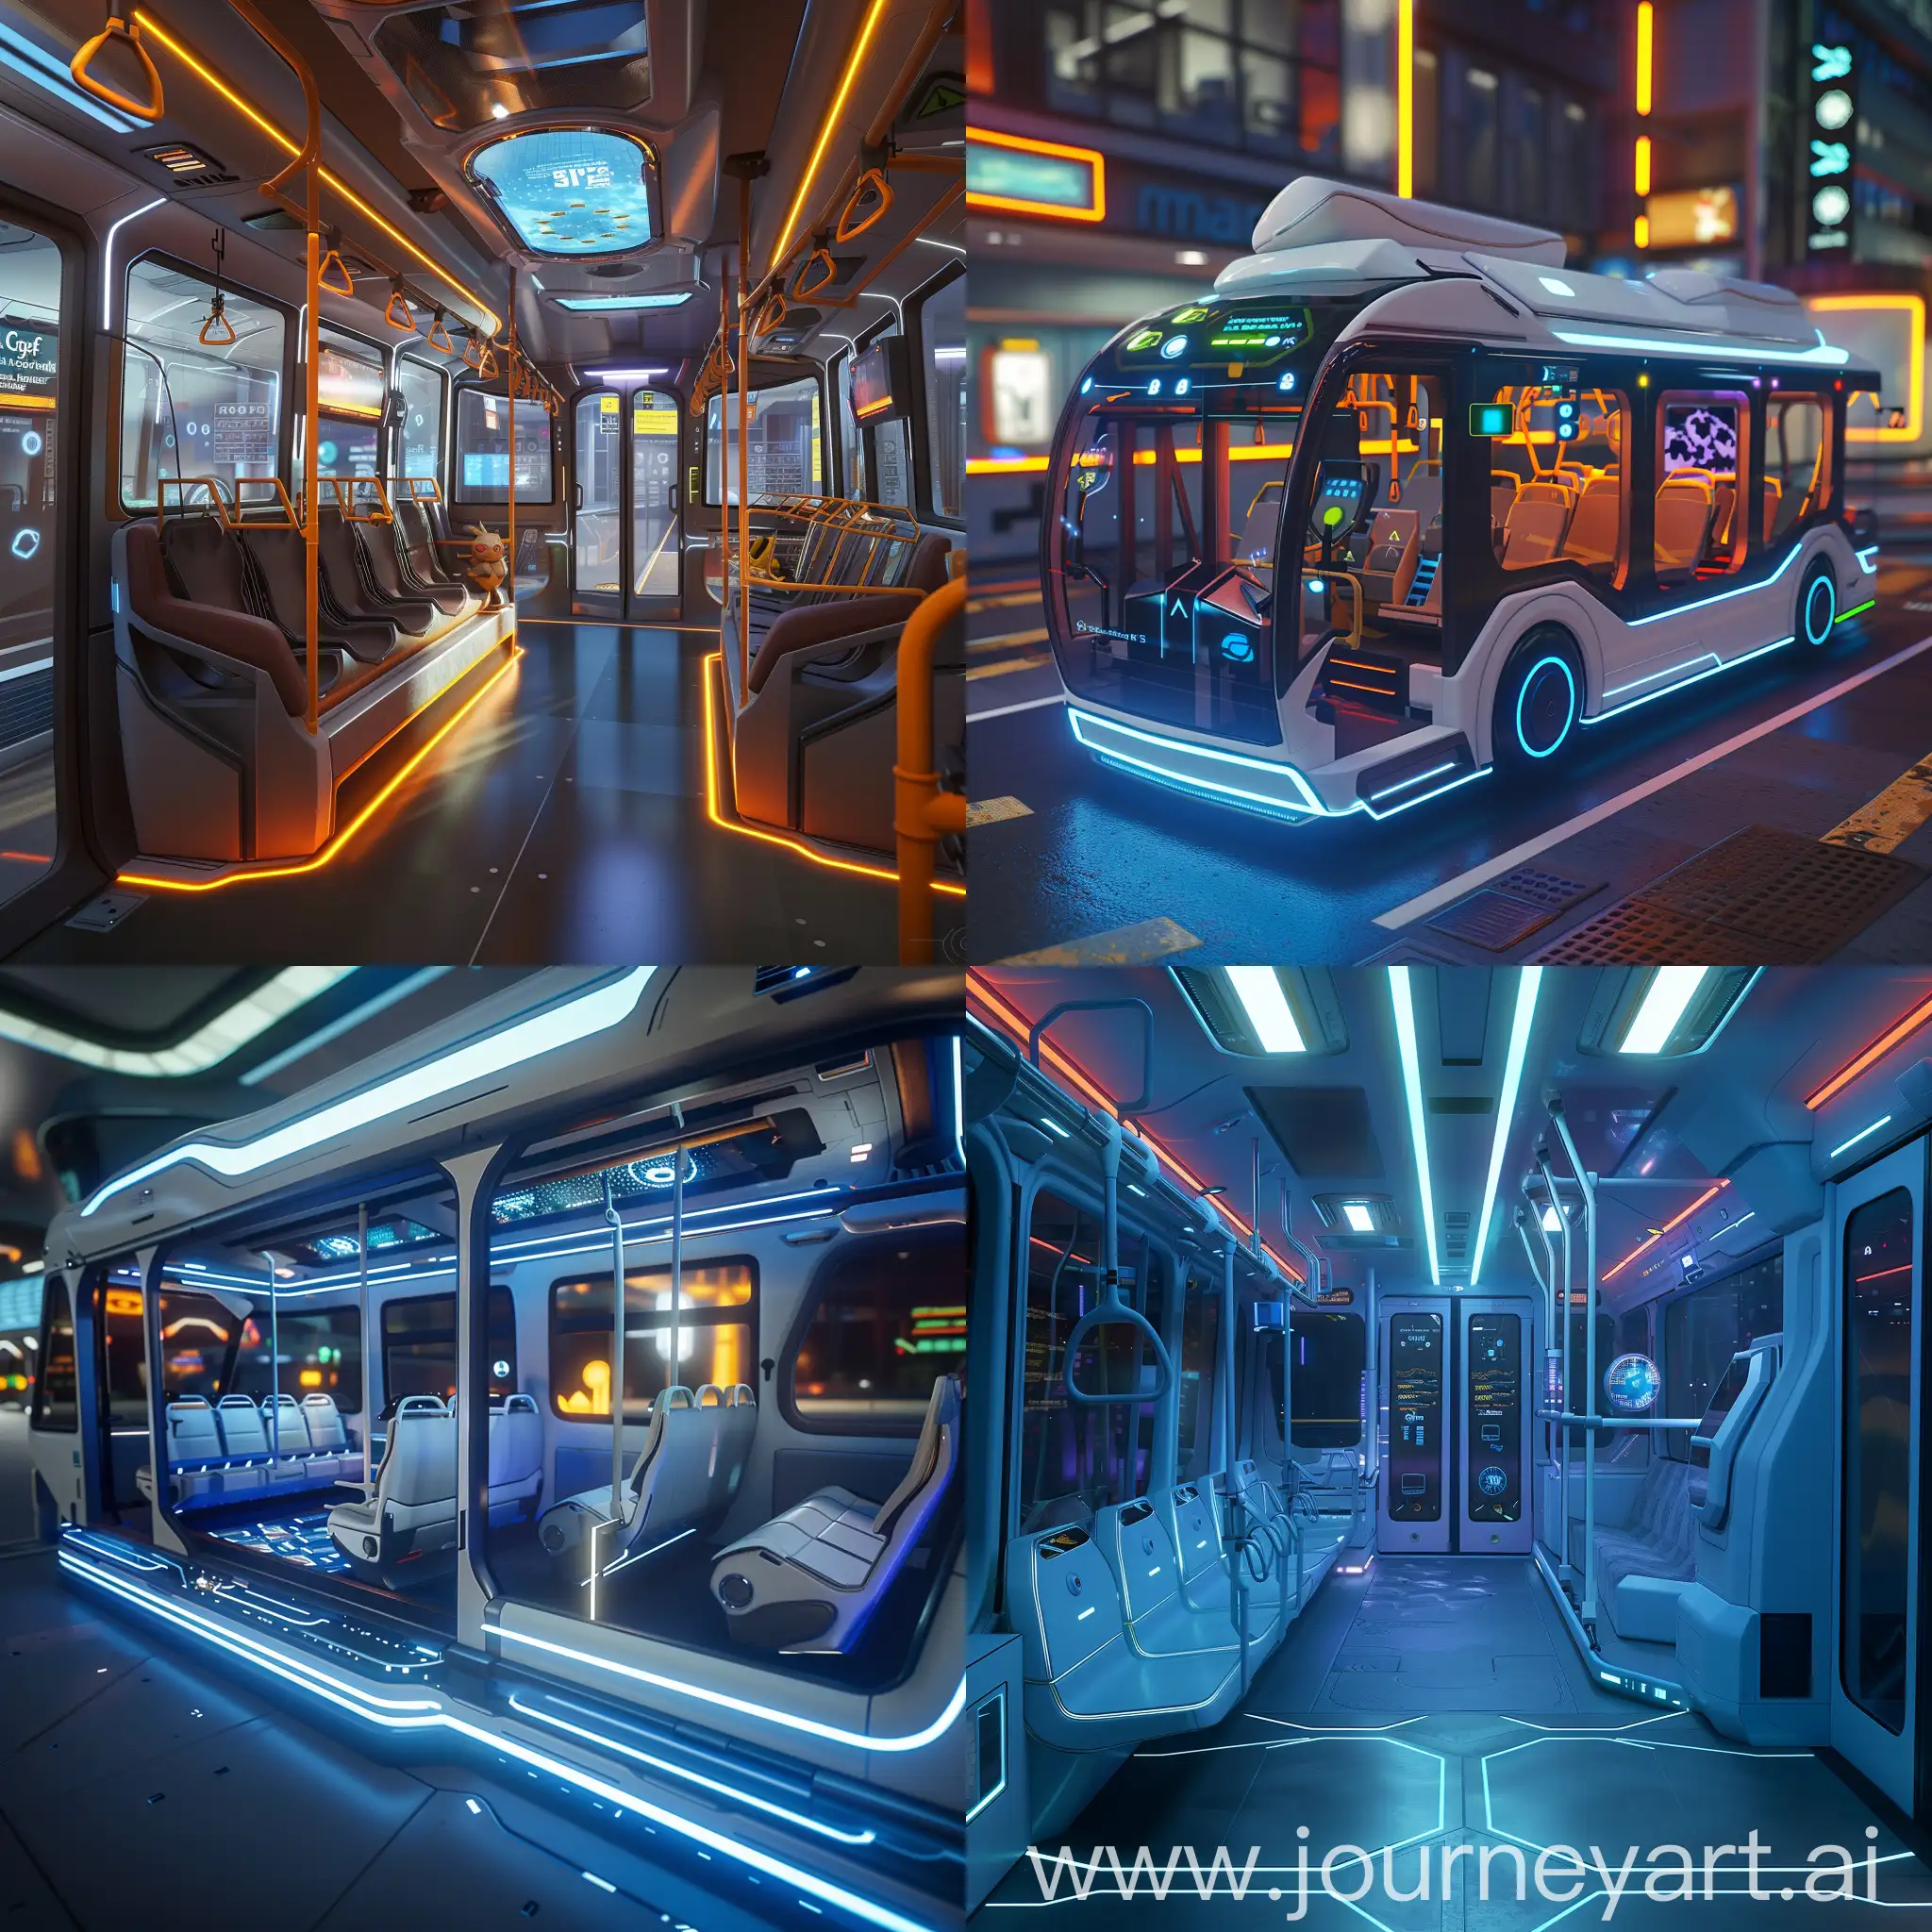 Futuristic-Bus-with-HoloStop-Announcements-AR-Seats-and-Adaptive-Climate-Control-Pods